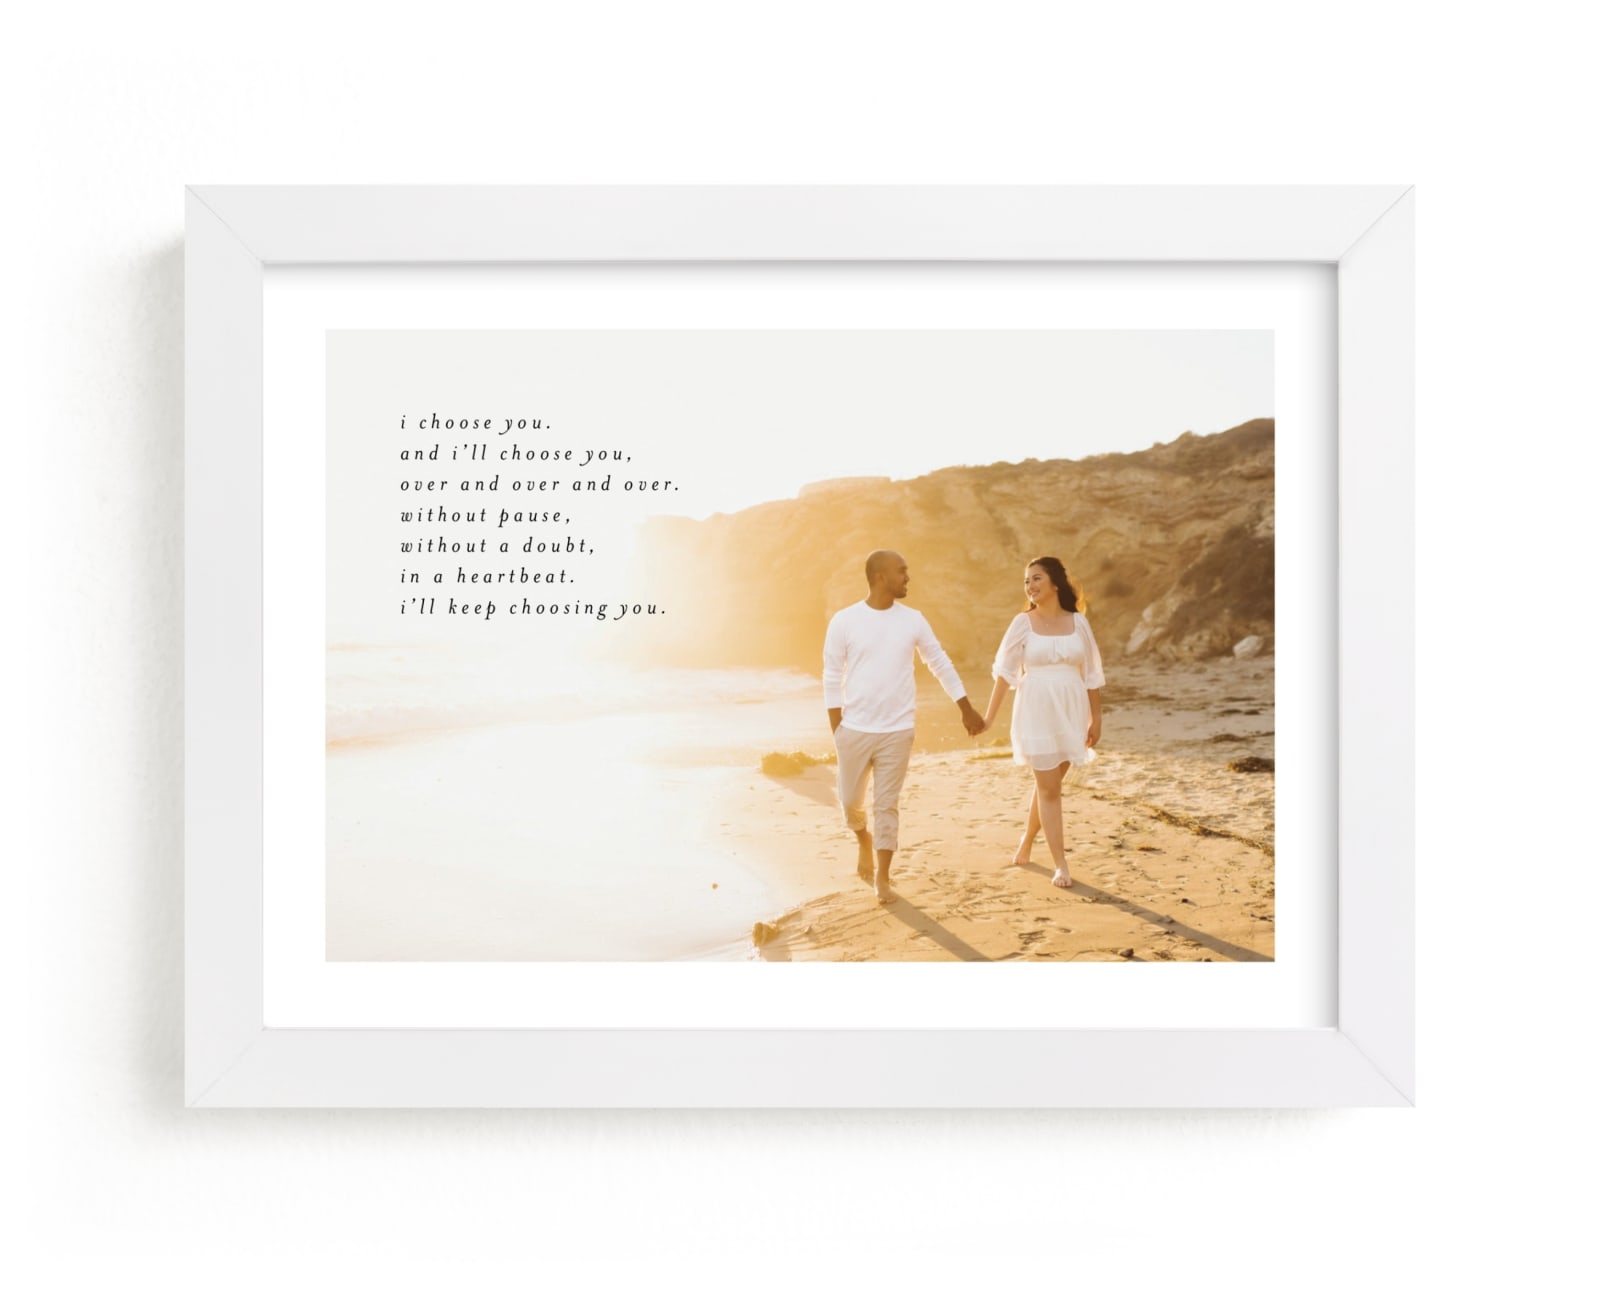 This is a white photo art by Phrosné called Minimalist Quote Keepsake.